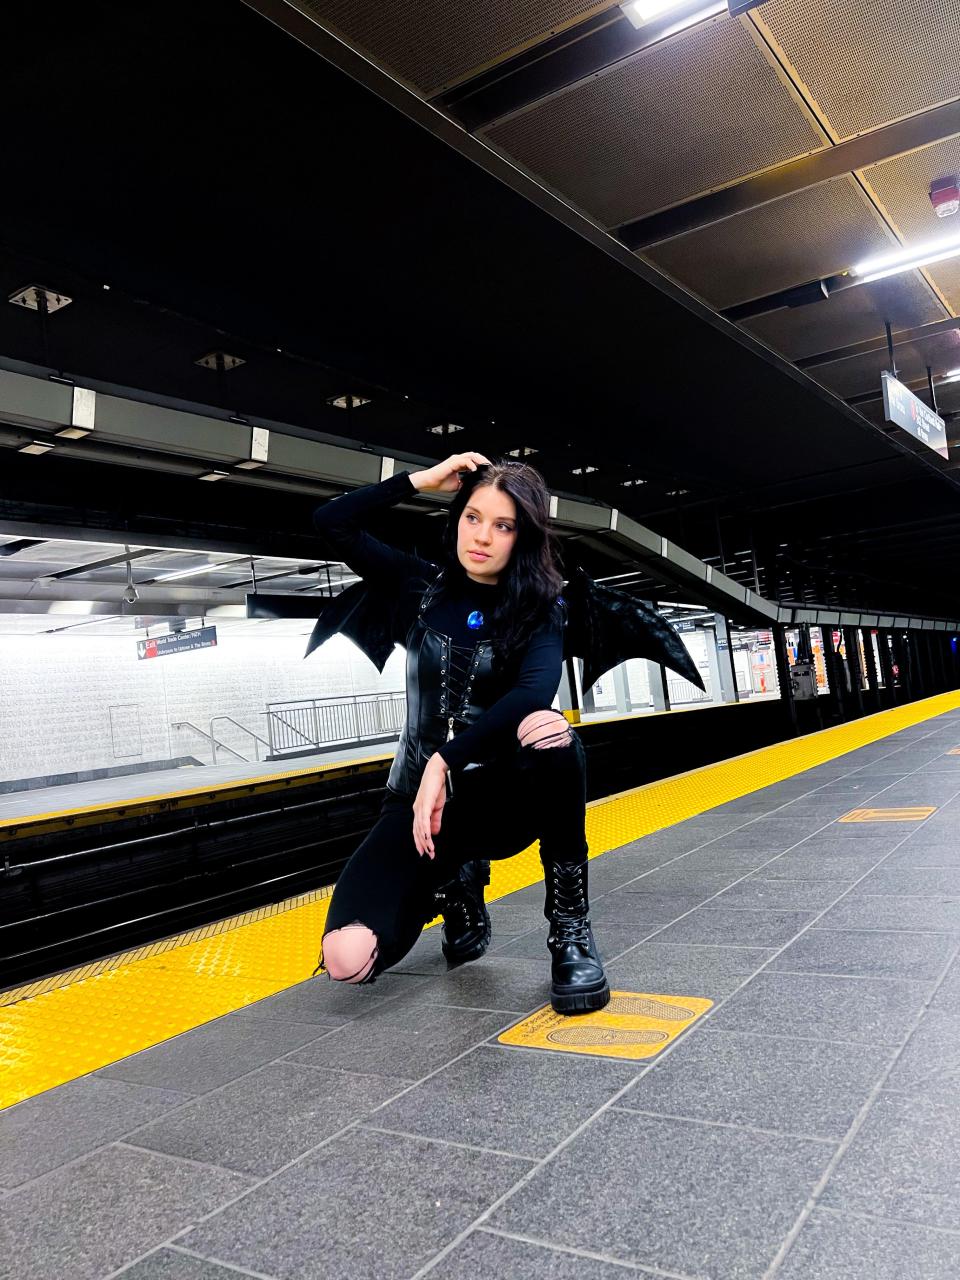 A woman in a costume with bat wings stands in a train station.